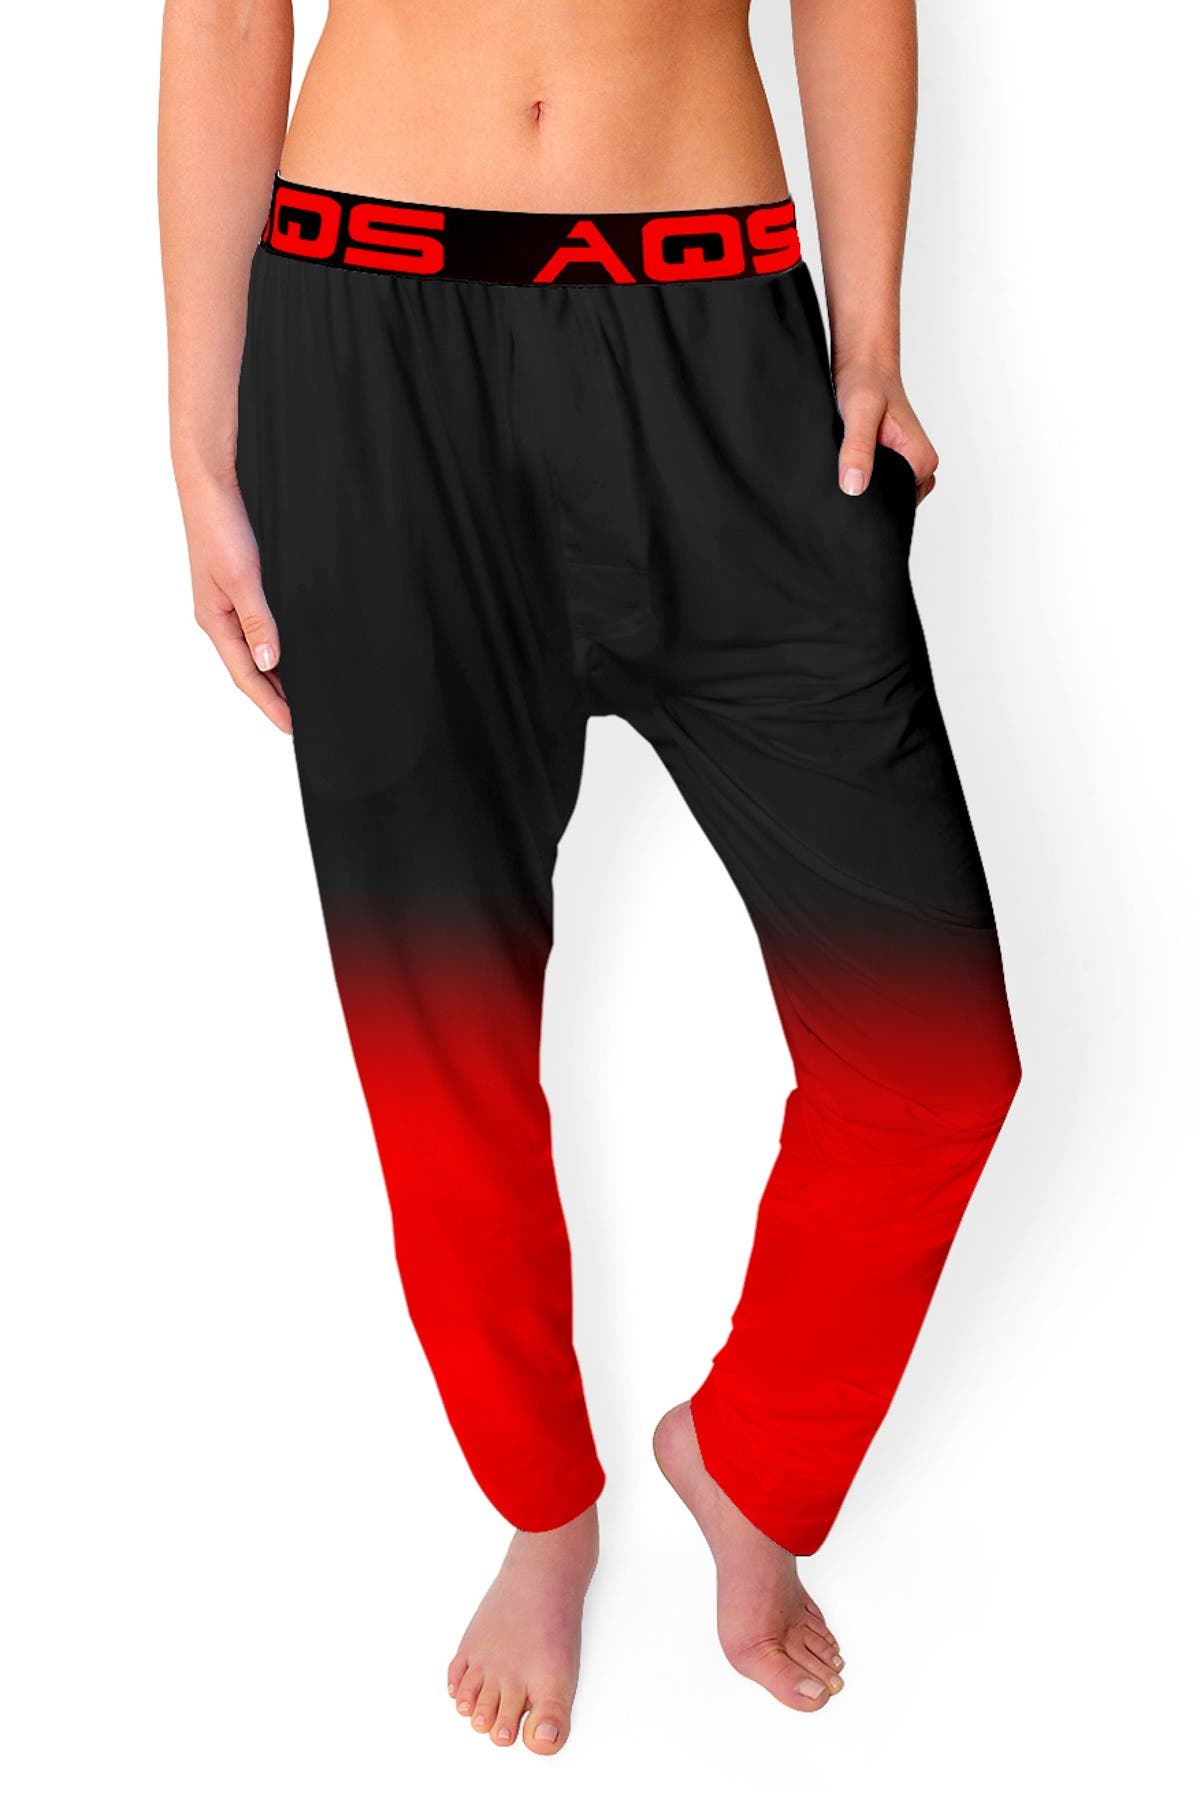 Aqs Ombre Lounge Pants In Black/red Ombre